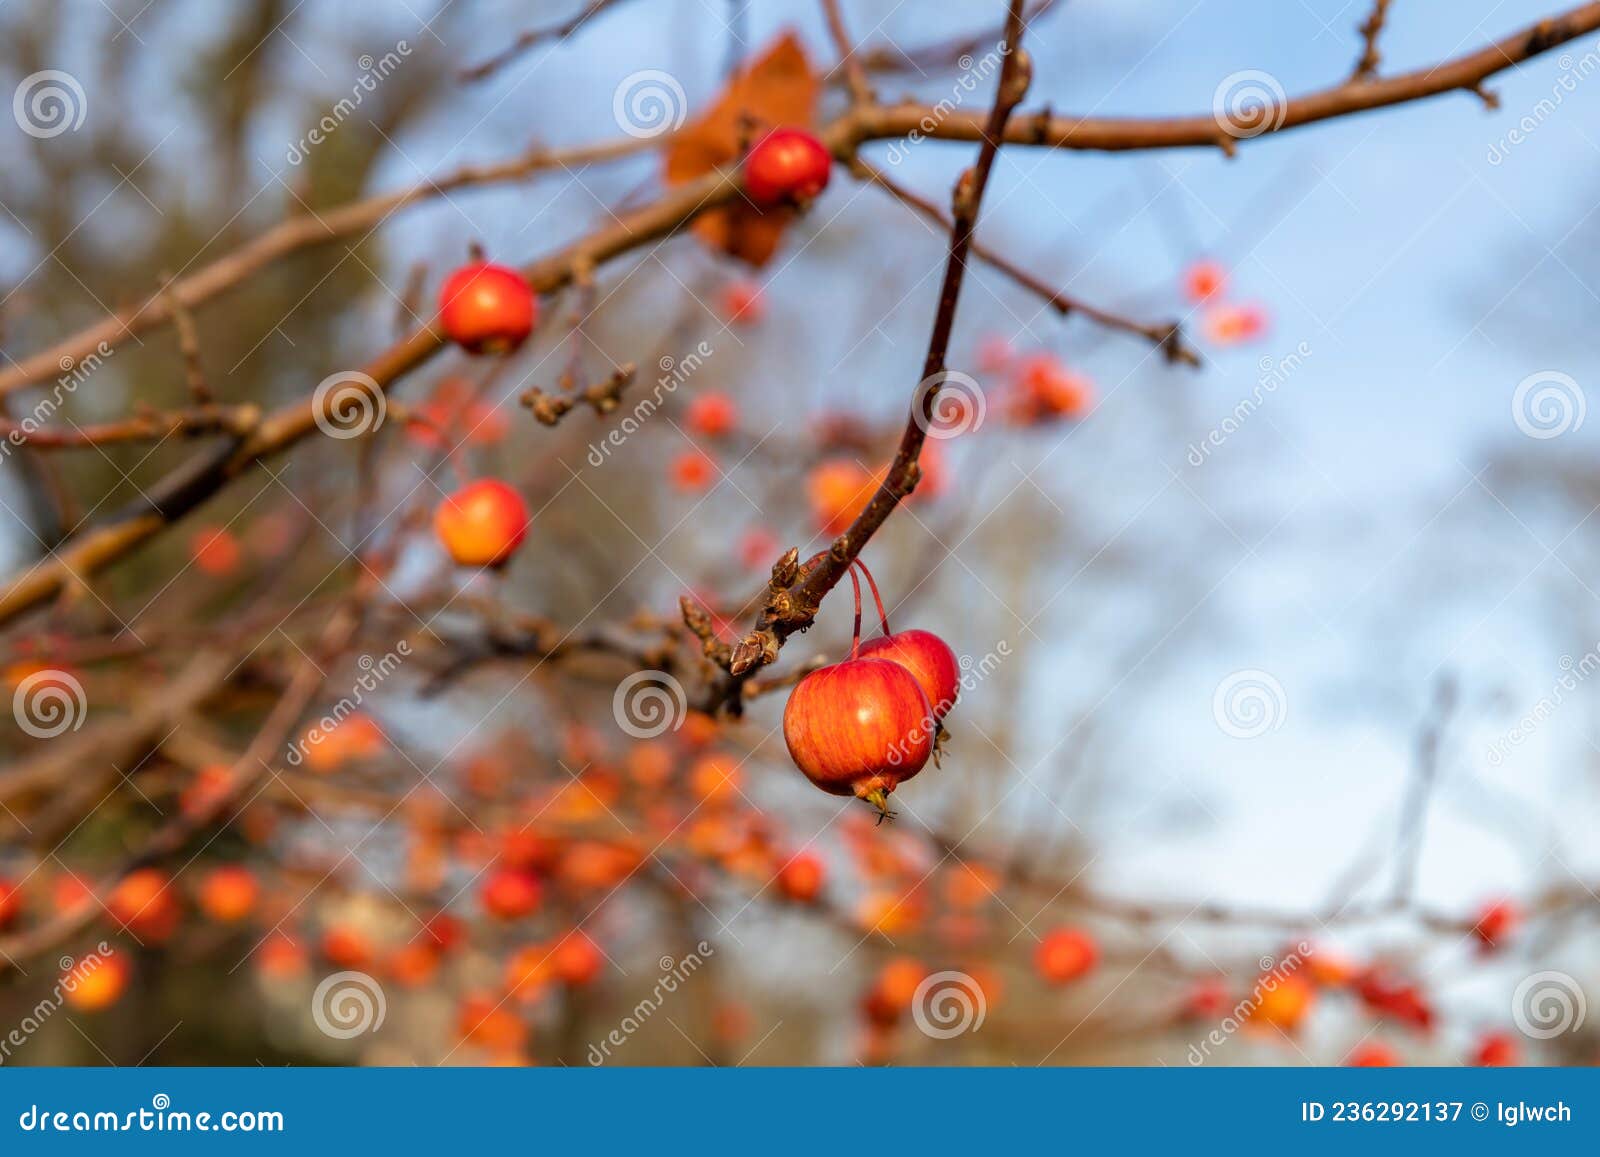 fruits of a red sentinel apple tree, a ornamental apple also called ruber custos, malus evereste